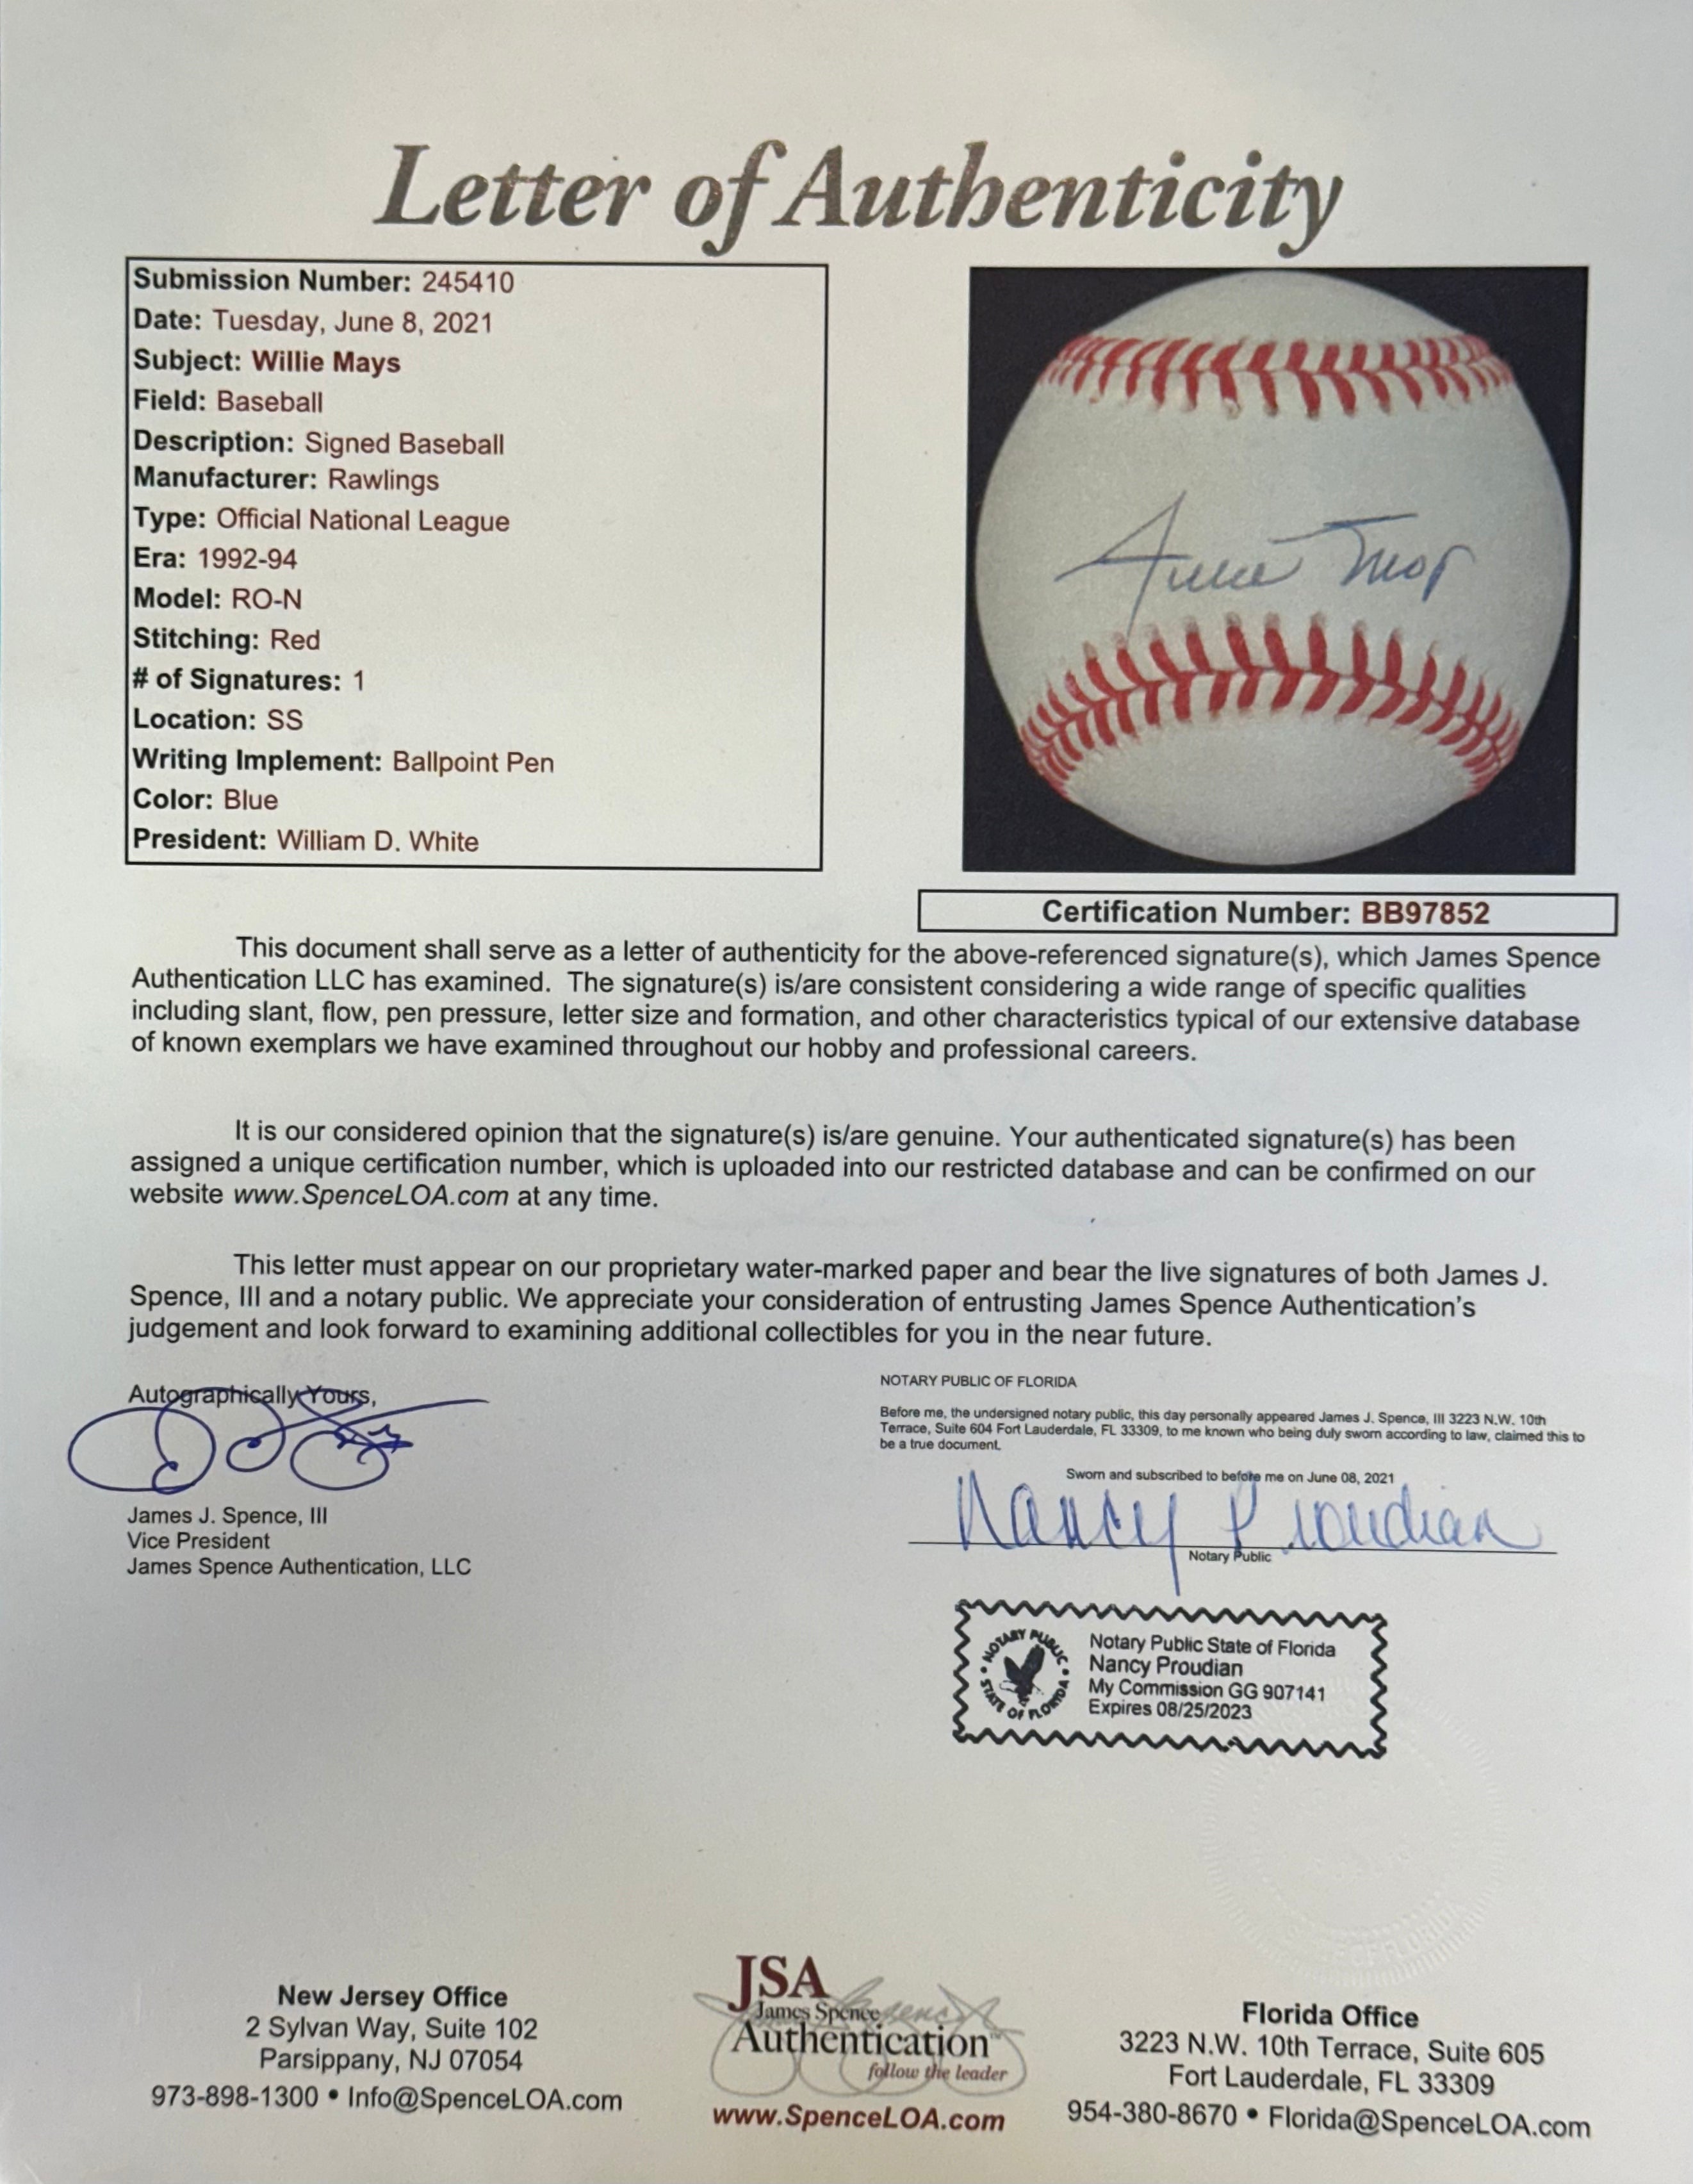 WILLIE MAYS AUTOGRAPH BASEBALL - CERTIFIED BY JSA AUTHENTICATION